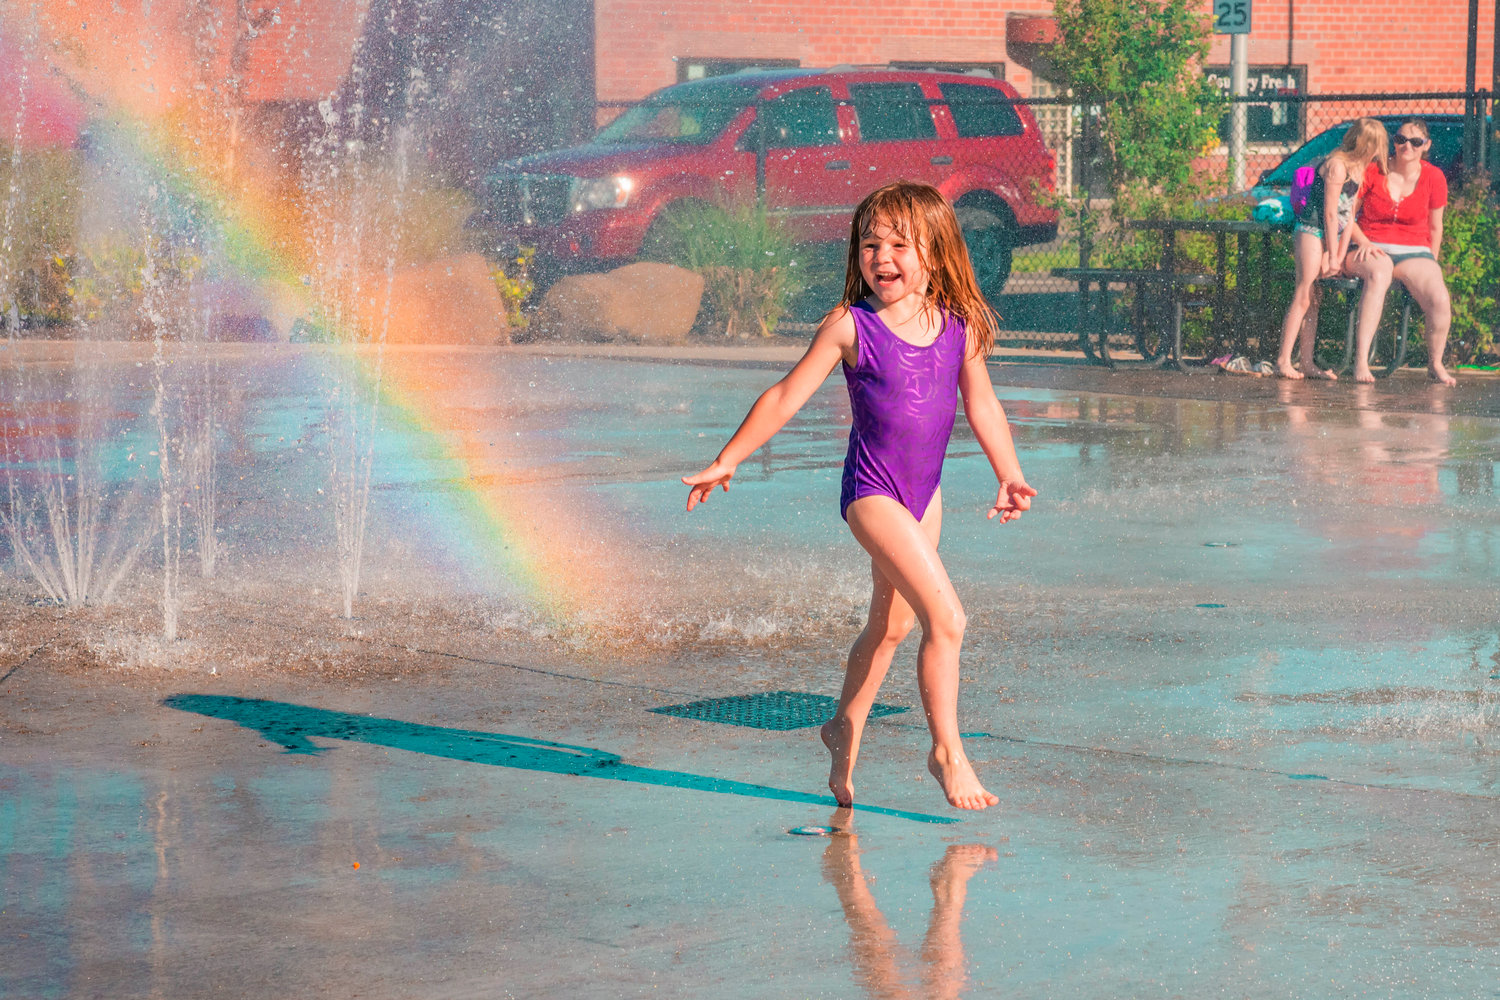 Emma Newkirk, 4, smiles and plays in the newly reopened splash pad, Tuesday afternoon in Centralia.